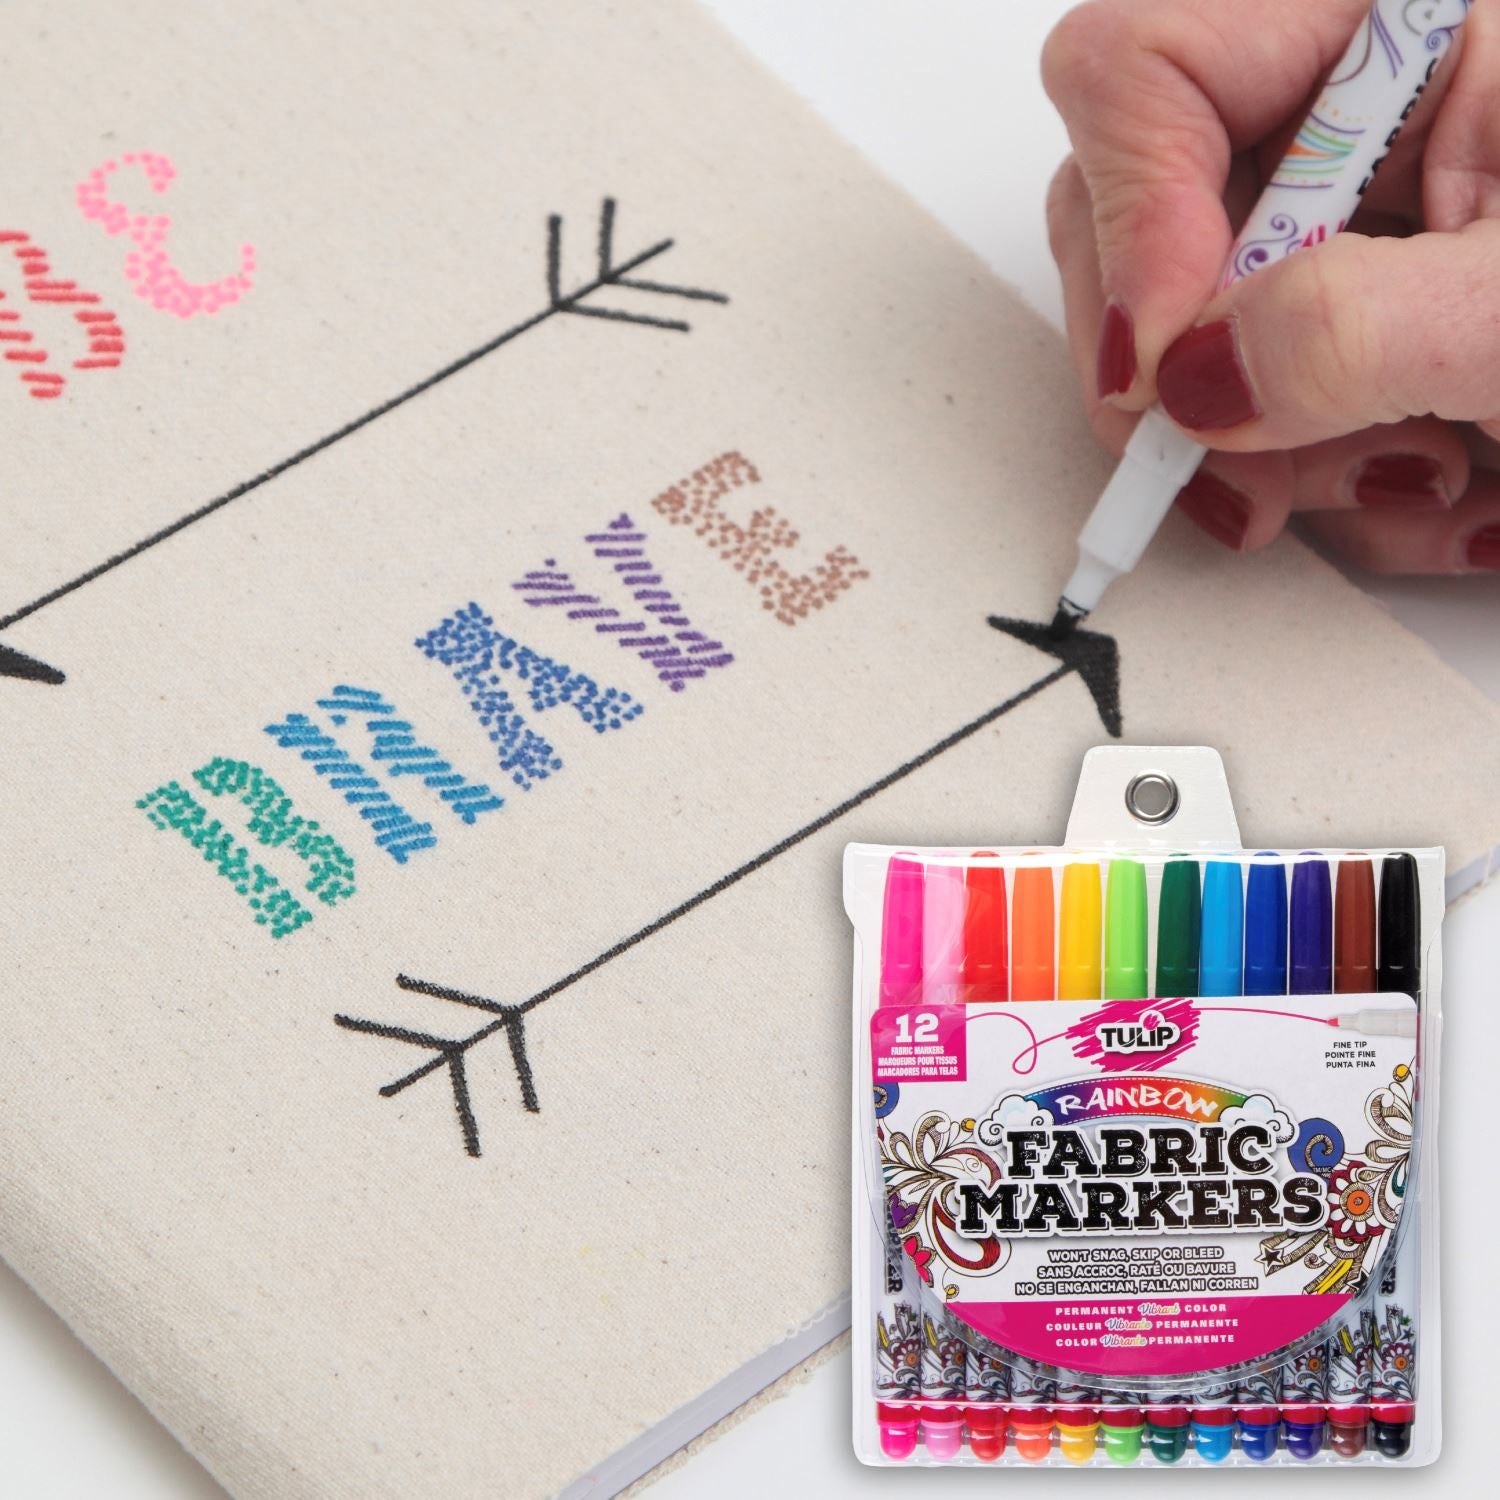 Crayola Fine Line Markers in 12 Vibrant Colors, Fine Tips for Detail  Coloring